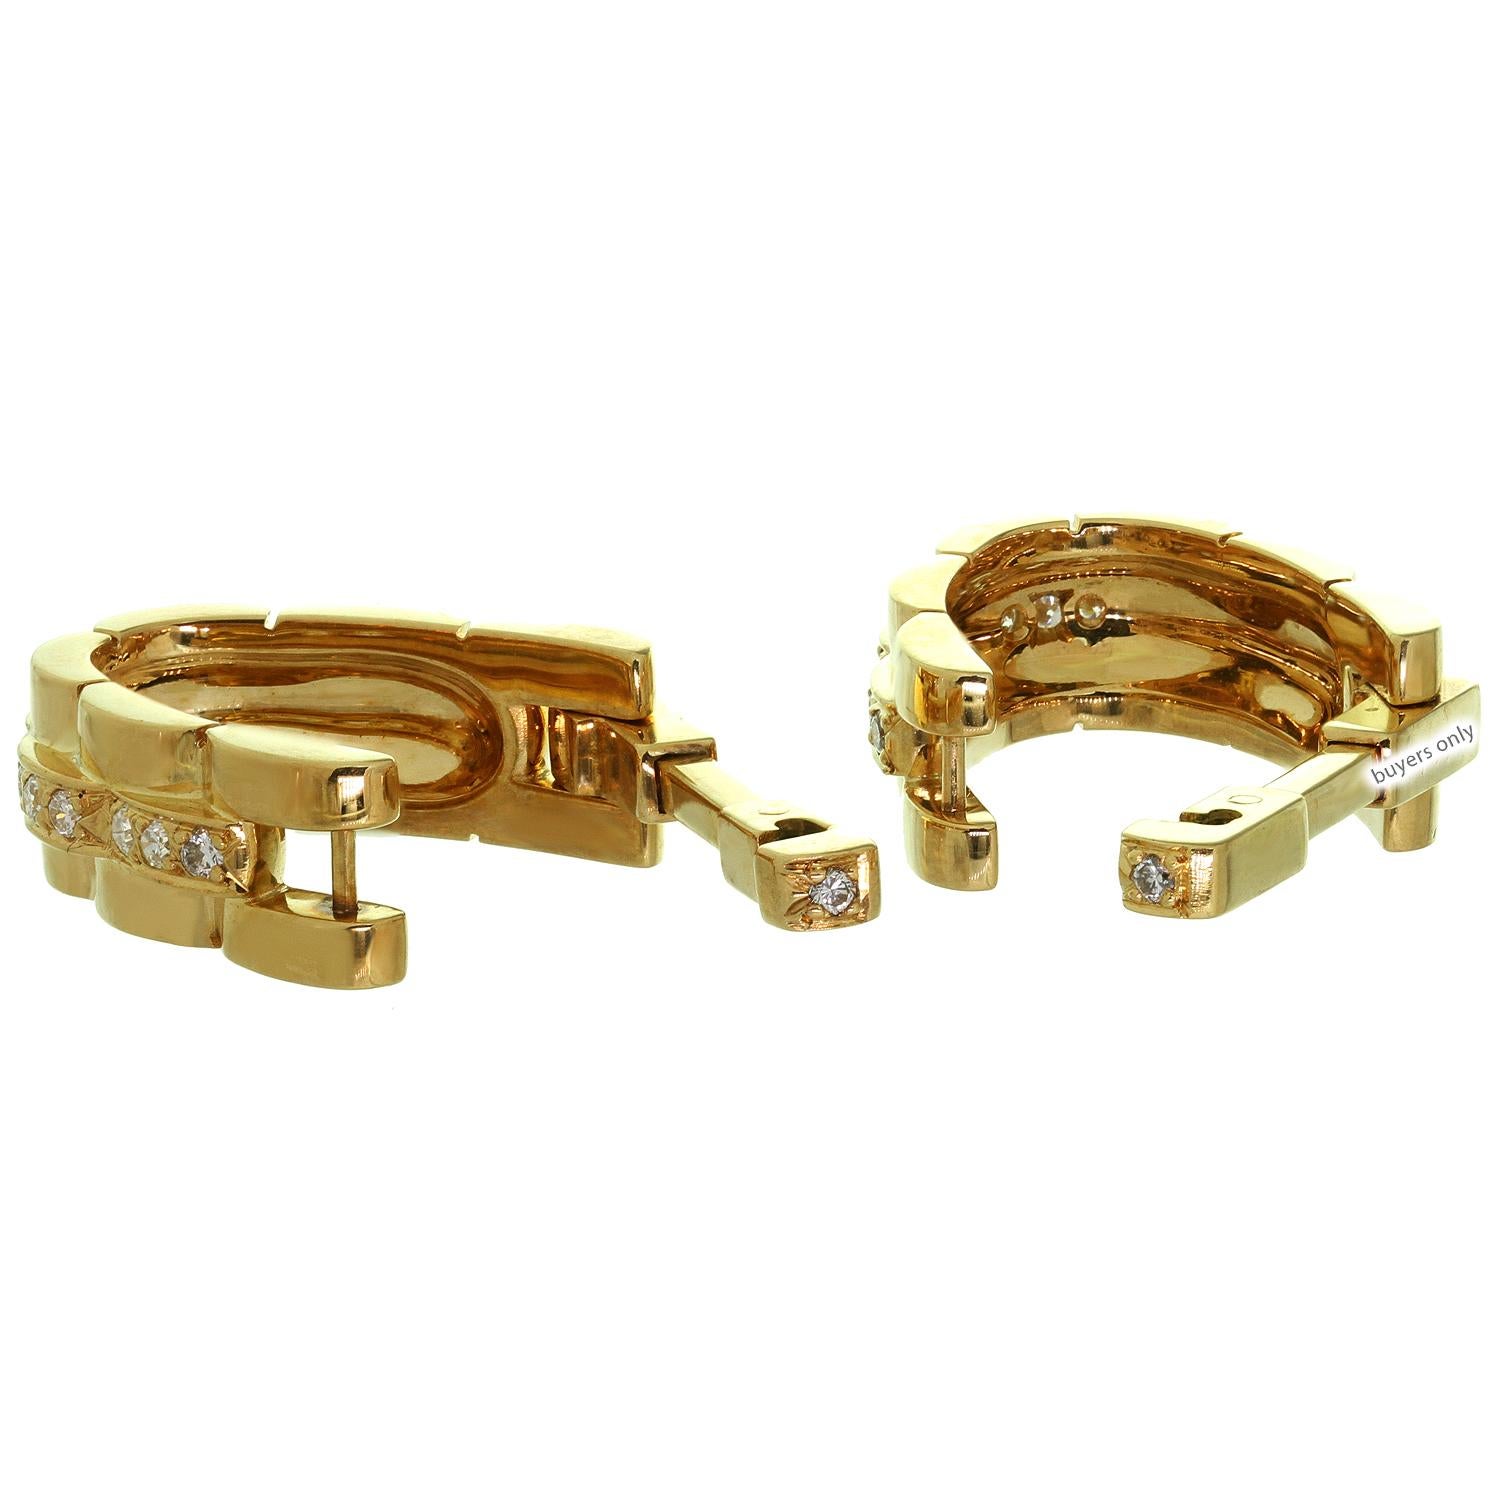 Brilliant Cut Cartier Maillon Panthere Diamond Yellow Gold Stirrup Cufflinks For Sale